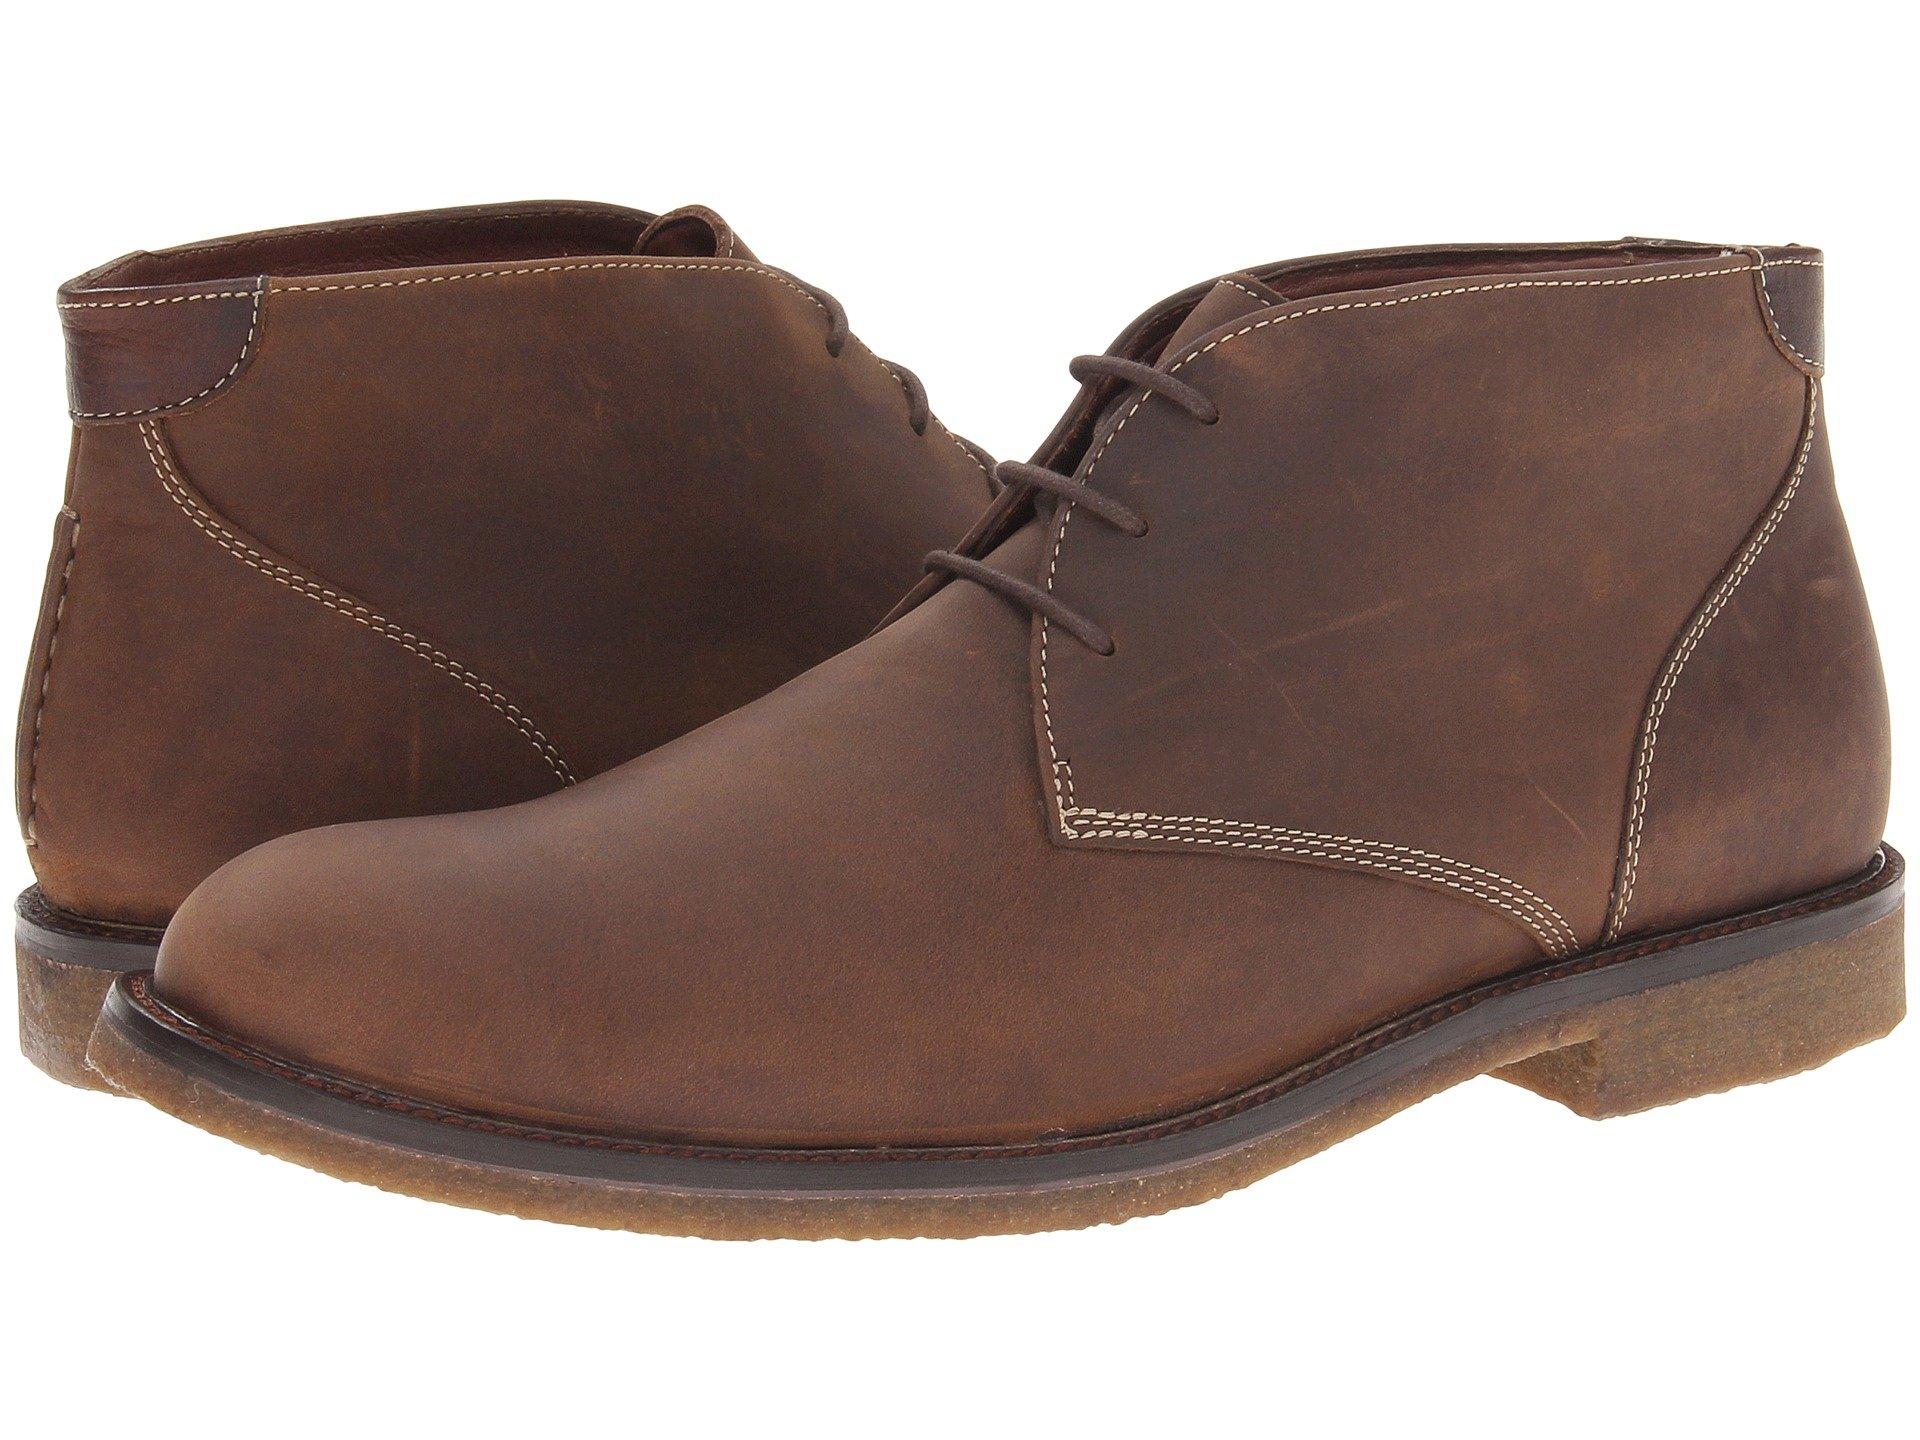 Johnston & Murphy Suede Copeland Casual Chukka Boot in Tan (Brown) for ...